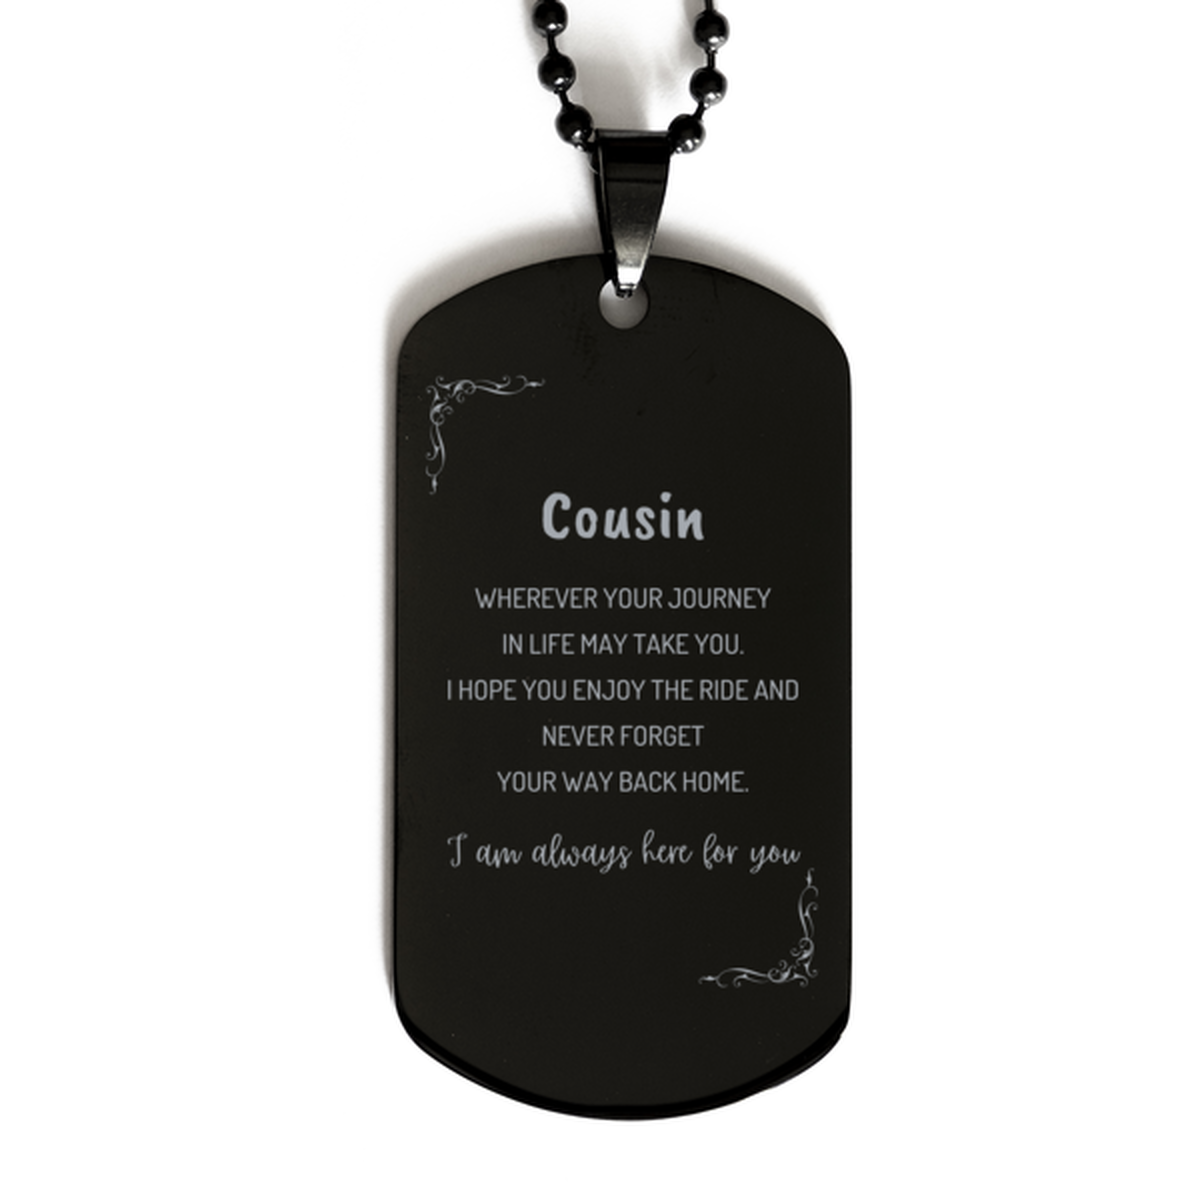 Cousin wherever your journey in life may take you, I am always here for you Cousin Black Dog Tag, Awesome Christmas Gifts For Cousin, Cousin Birthday Gifts for Men Women Family Loved One